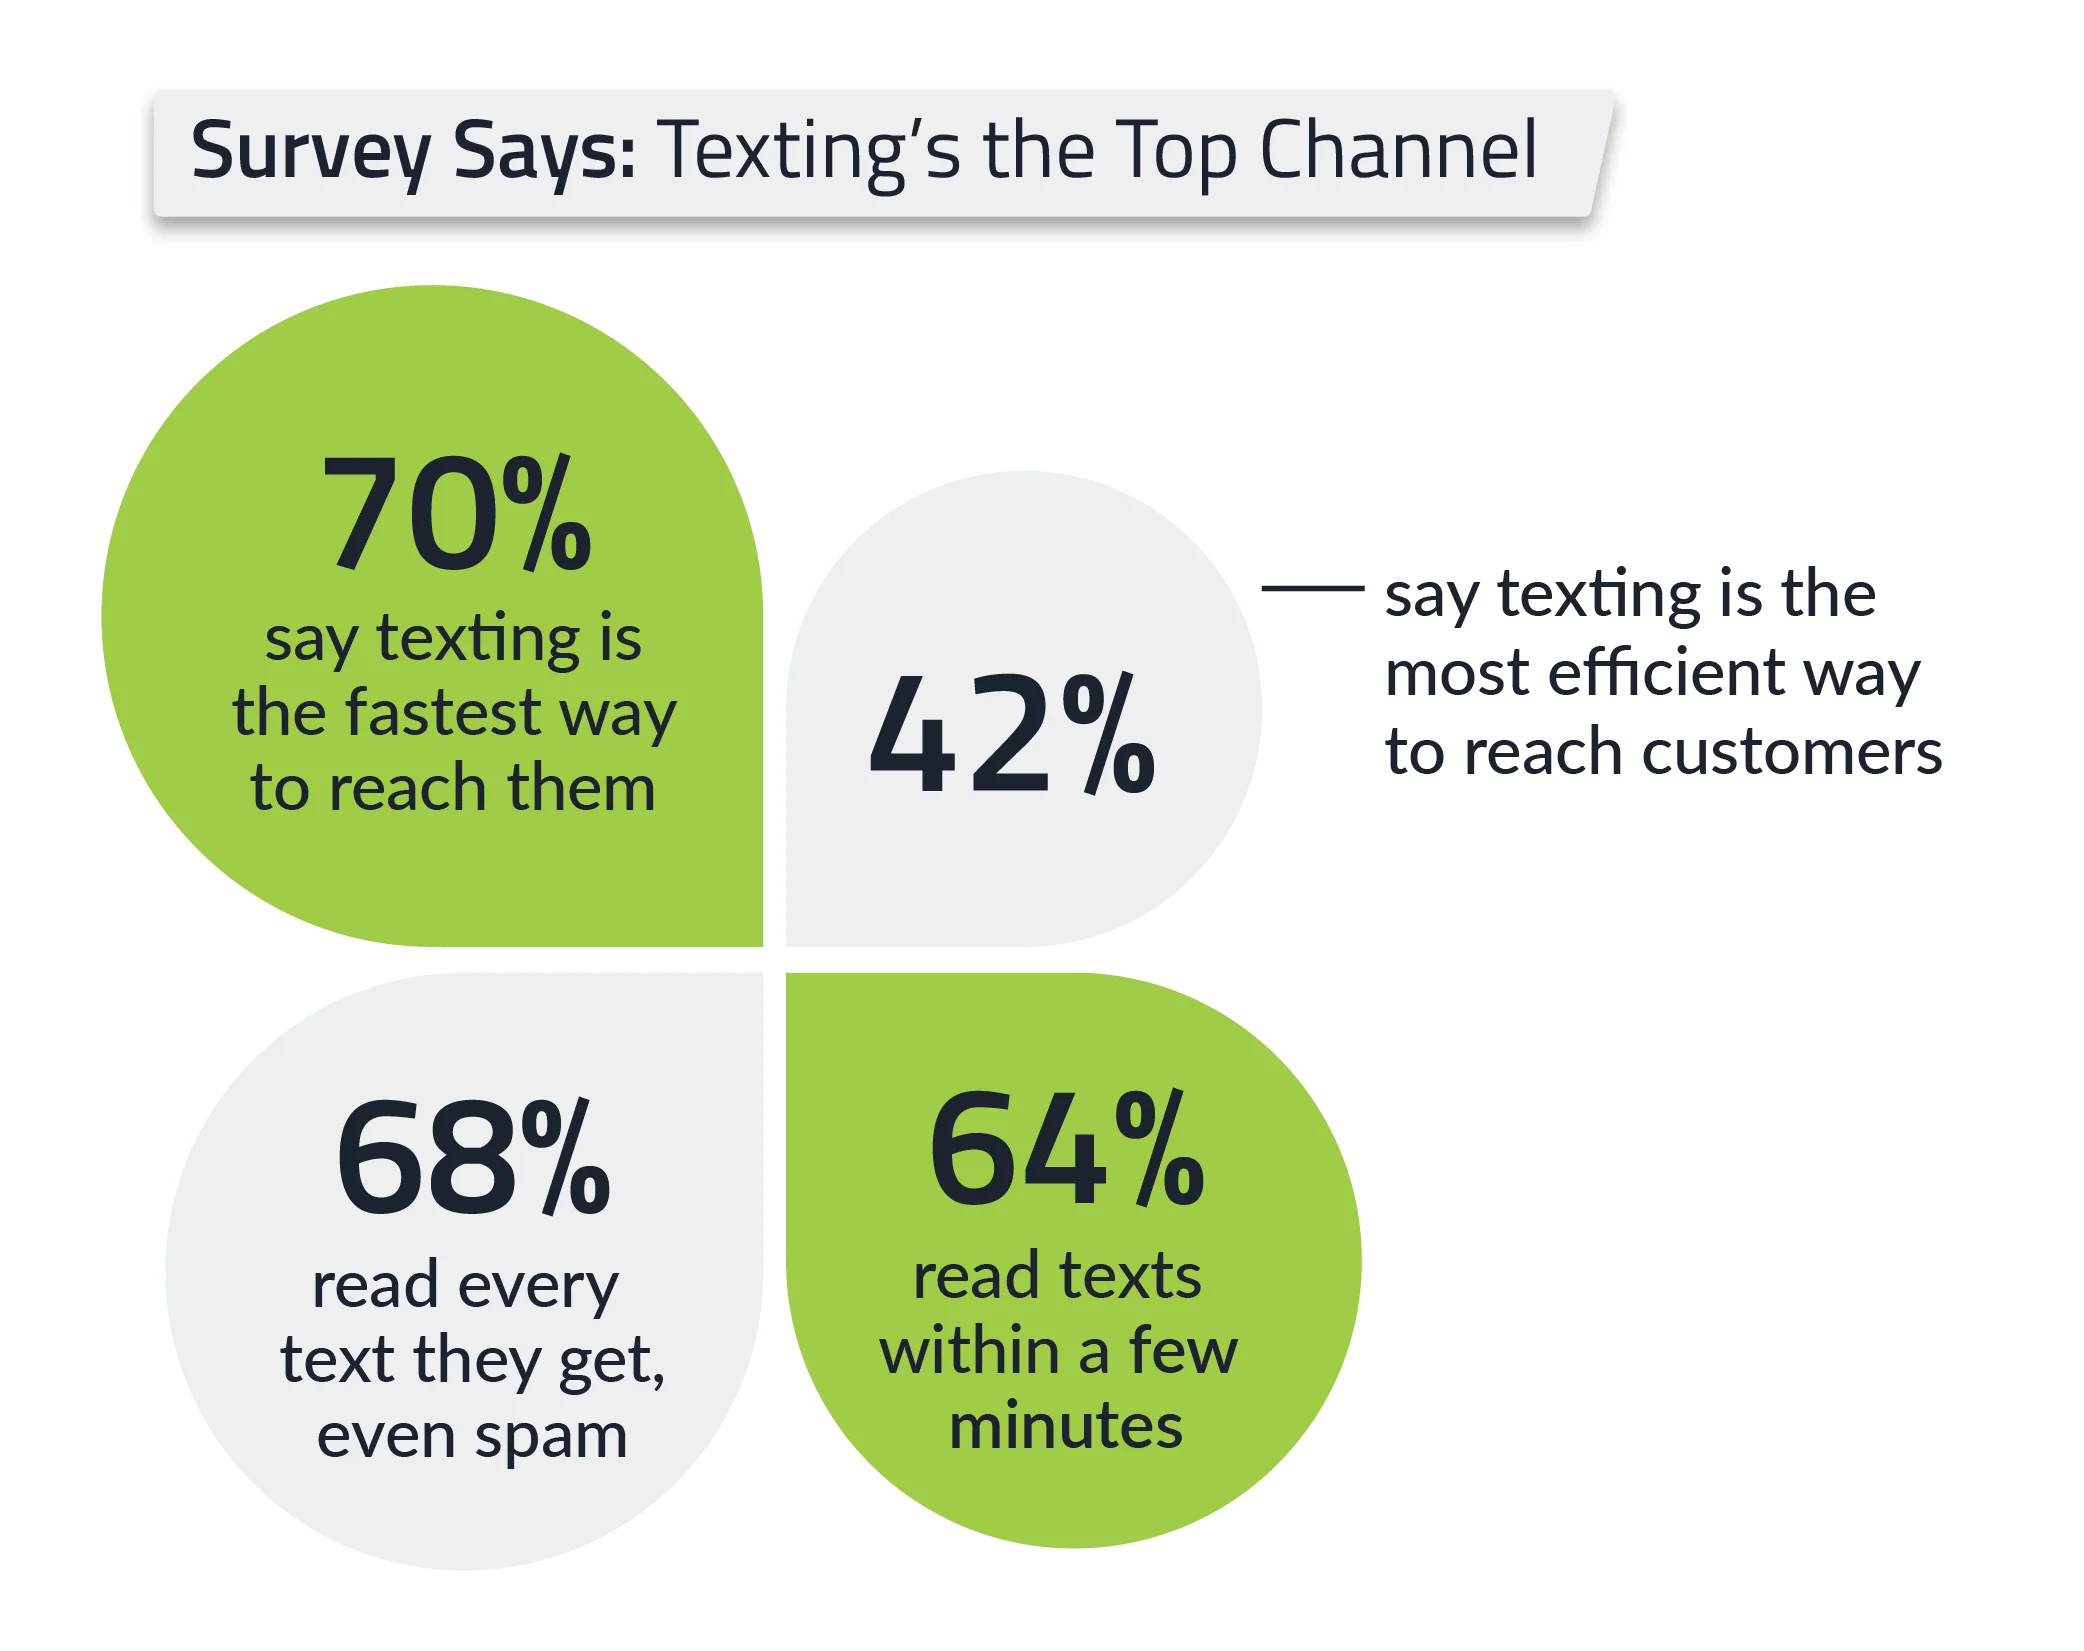 text-messaging-trend-texting-is-the-top-communication-channel